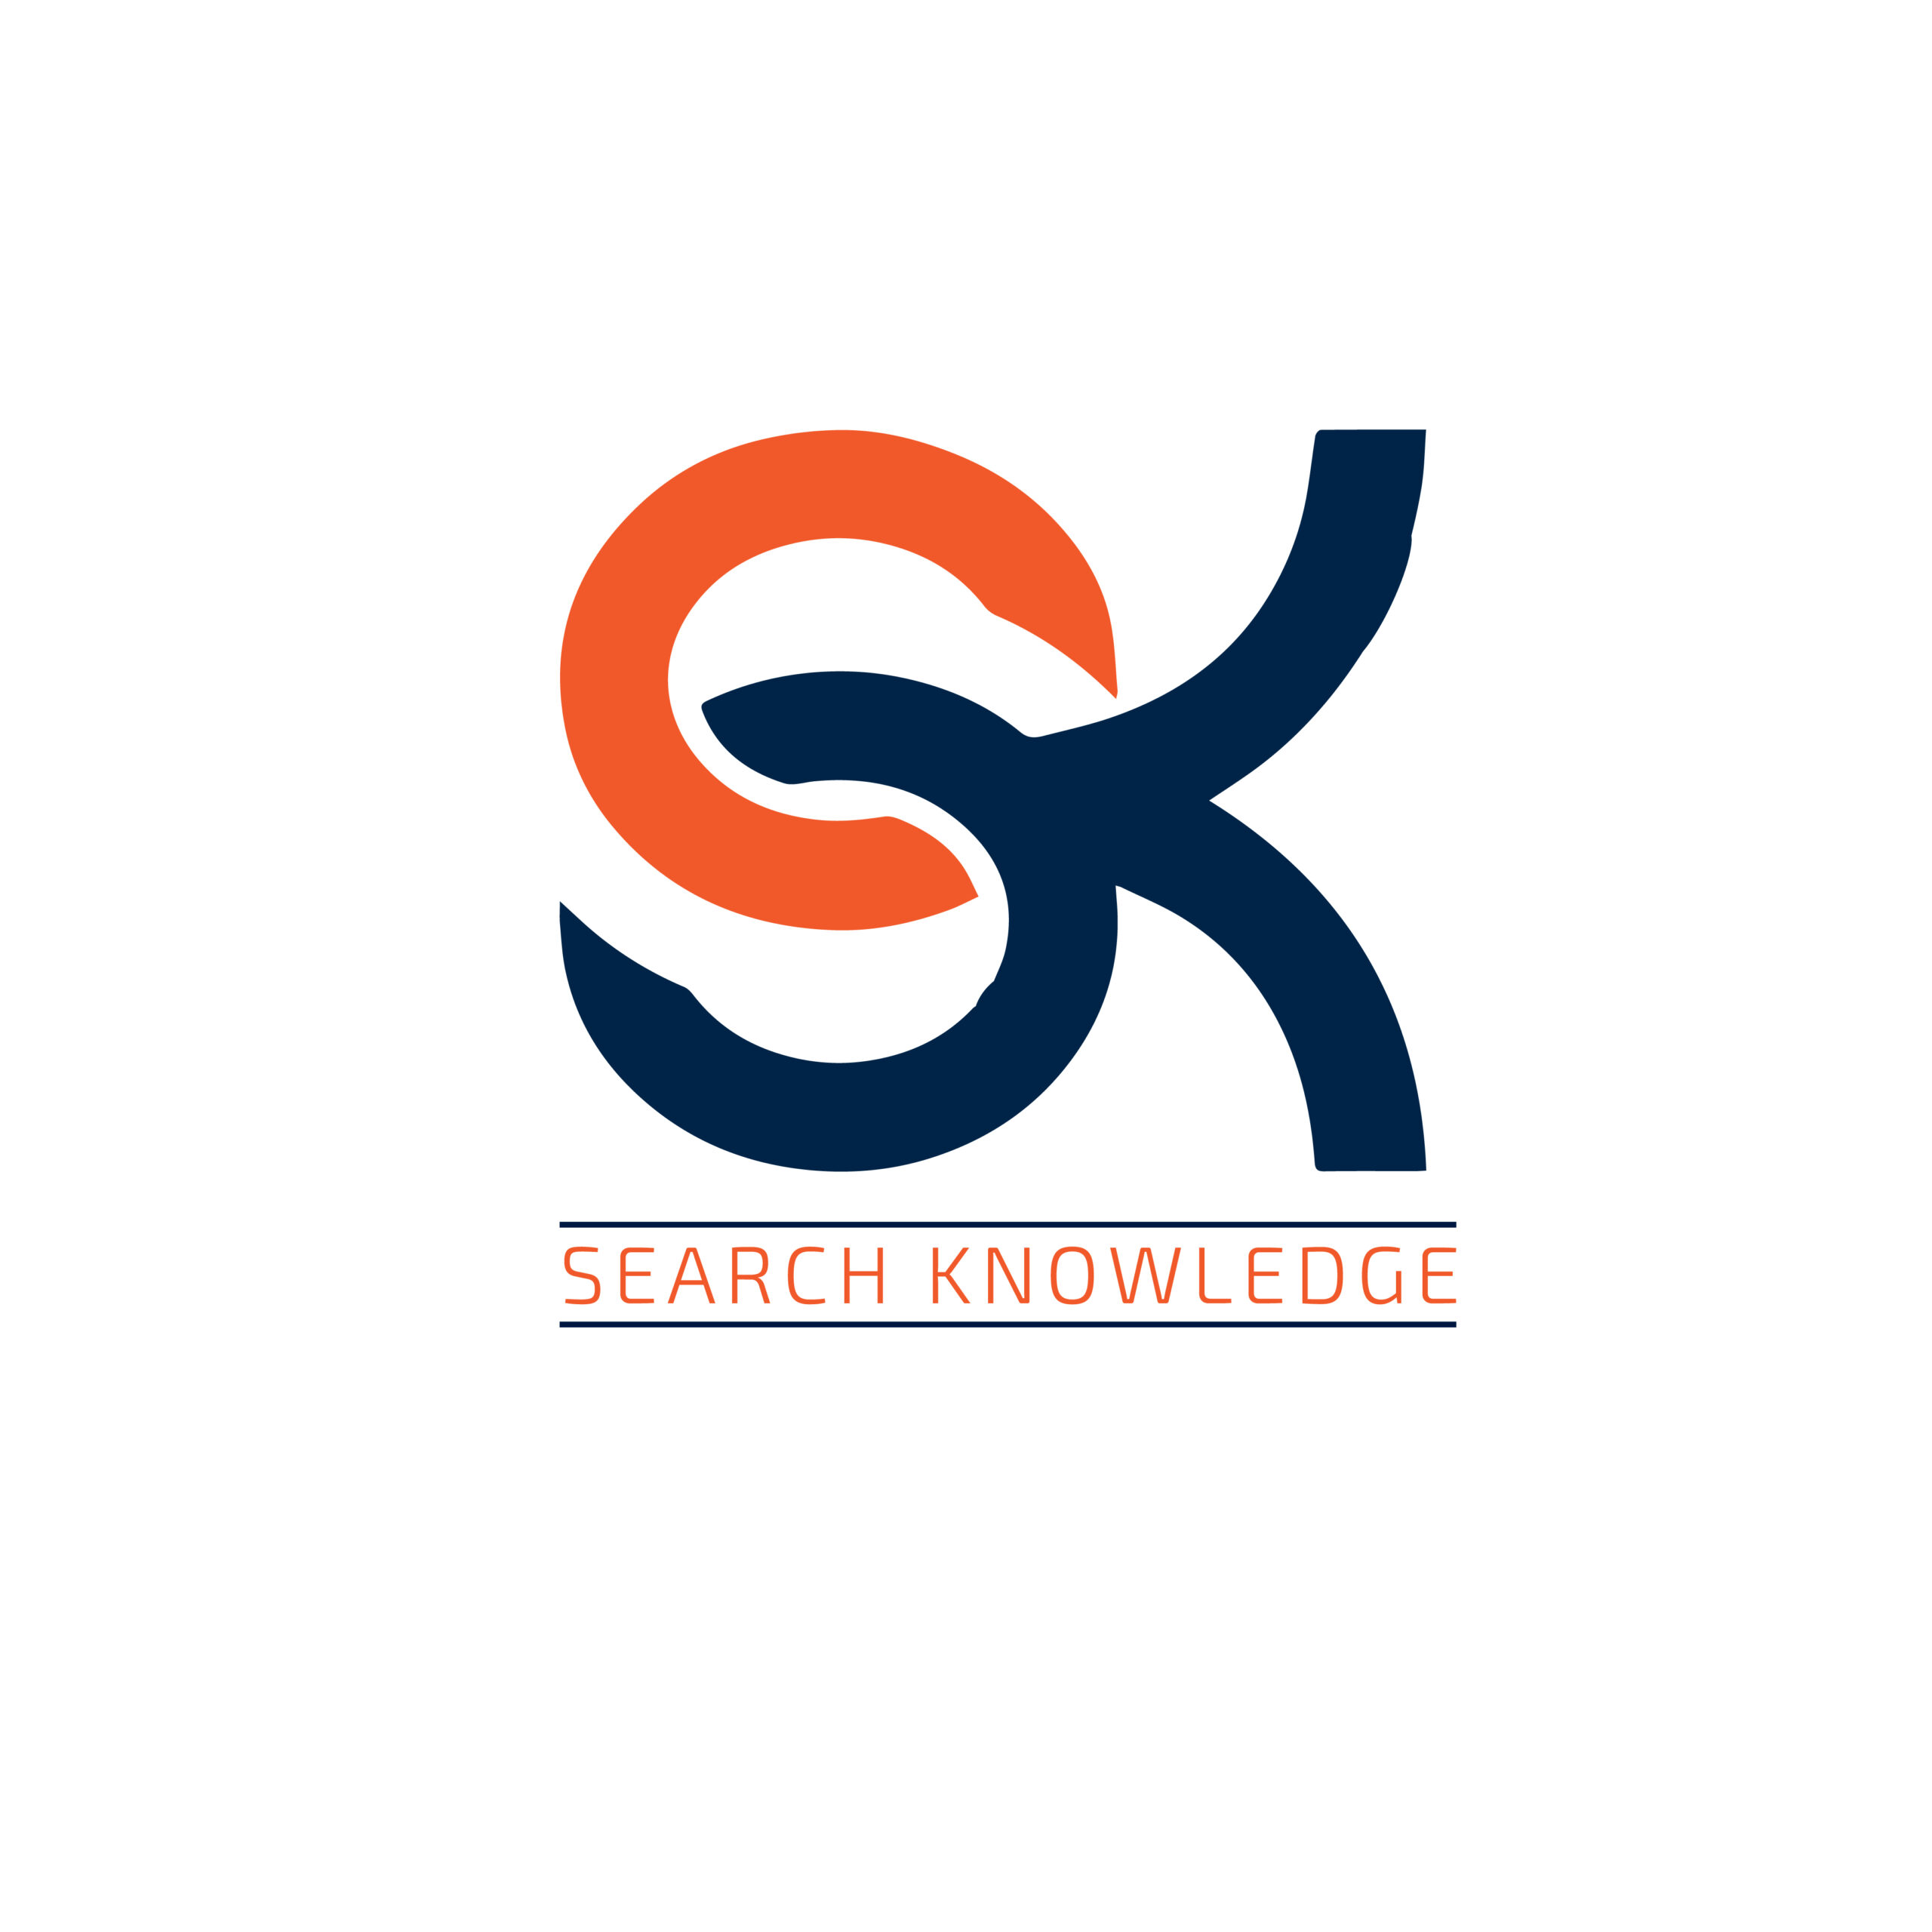 Search knowledge